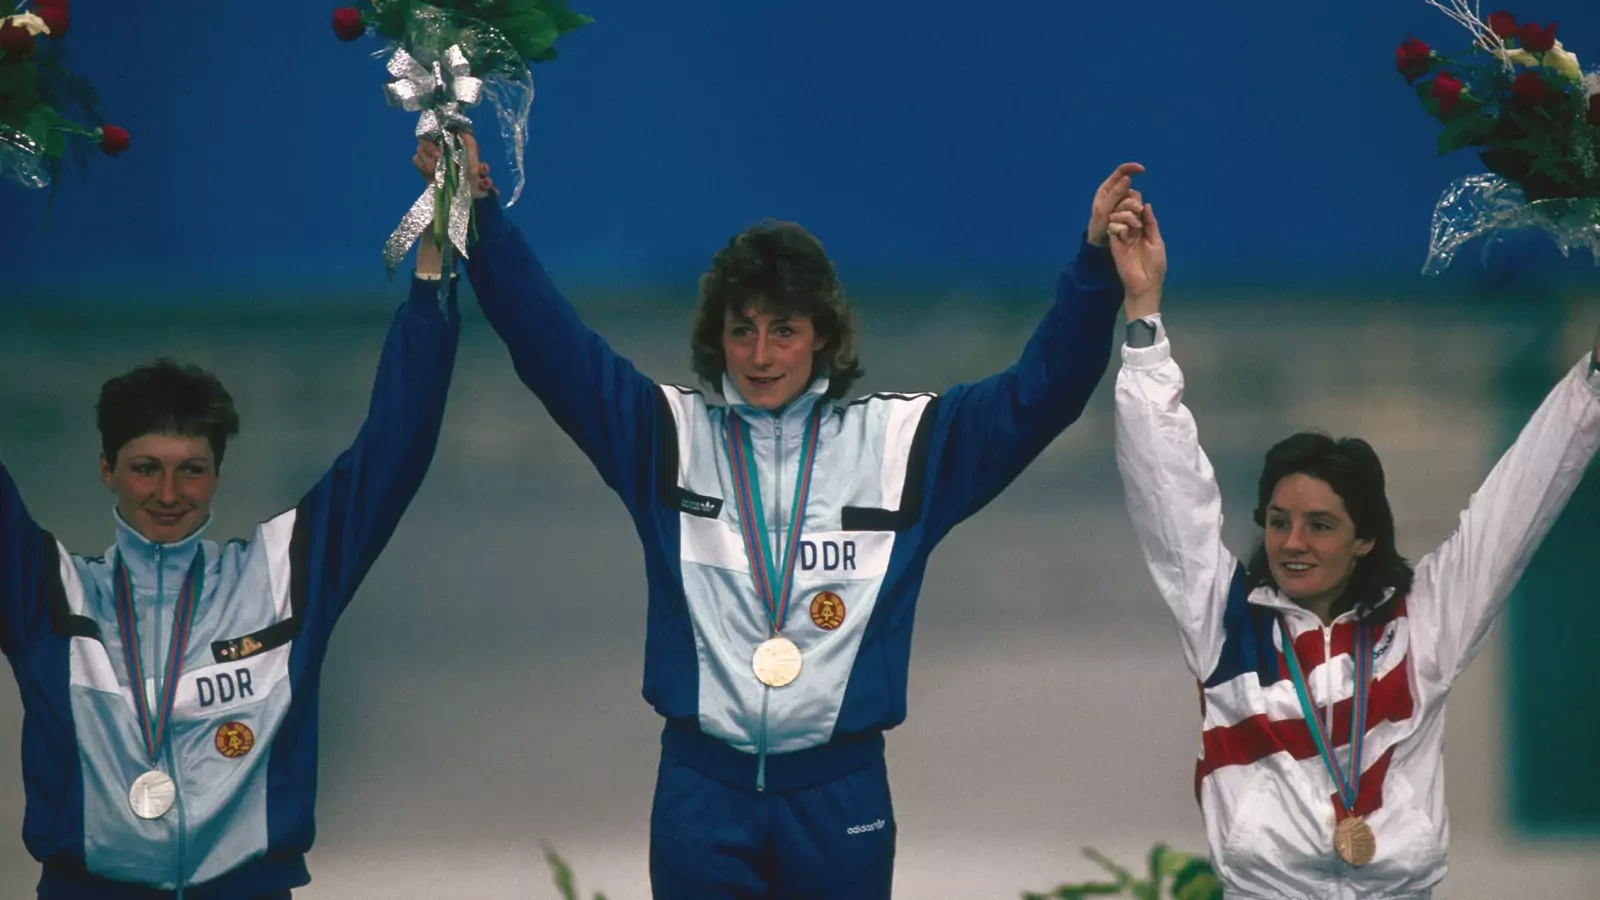 East Germany was a perennial powerhouse at winter games, including the 1988 Calgary Games where it won gold and bronze in the women’s 1000 meters Speedskating event.